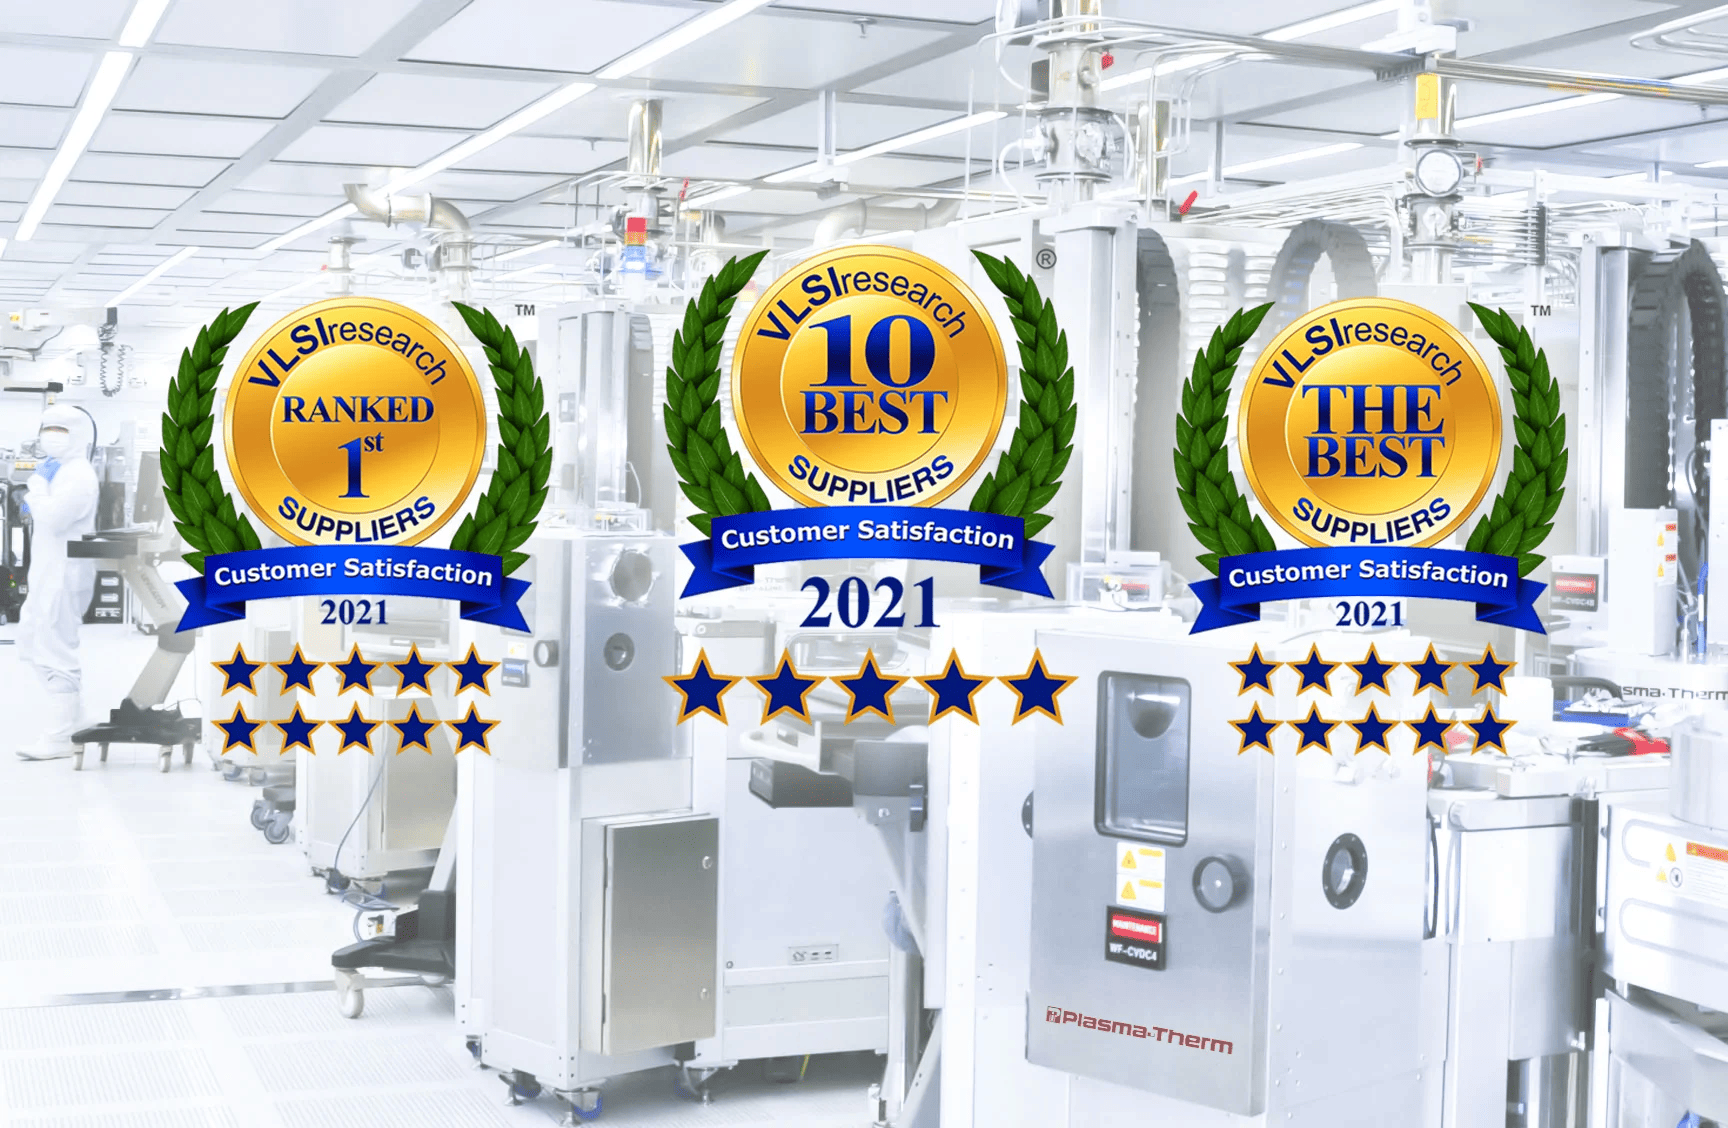 Plasma-Therm ‘RANKED 1st’ in VLSI 2021 Survey for Etch & Clean Equipment – Marking 10 Consecutive Years